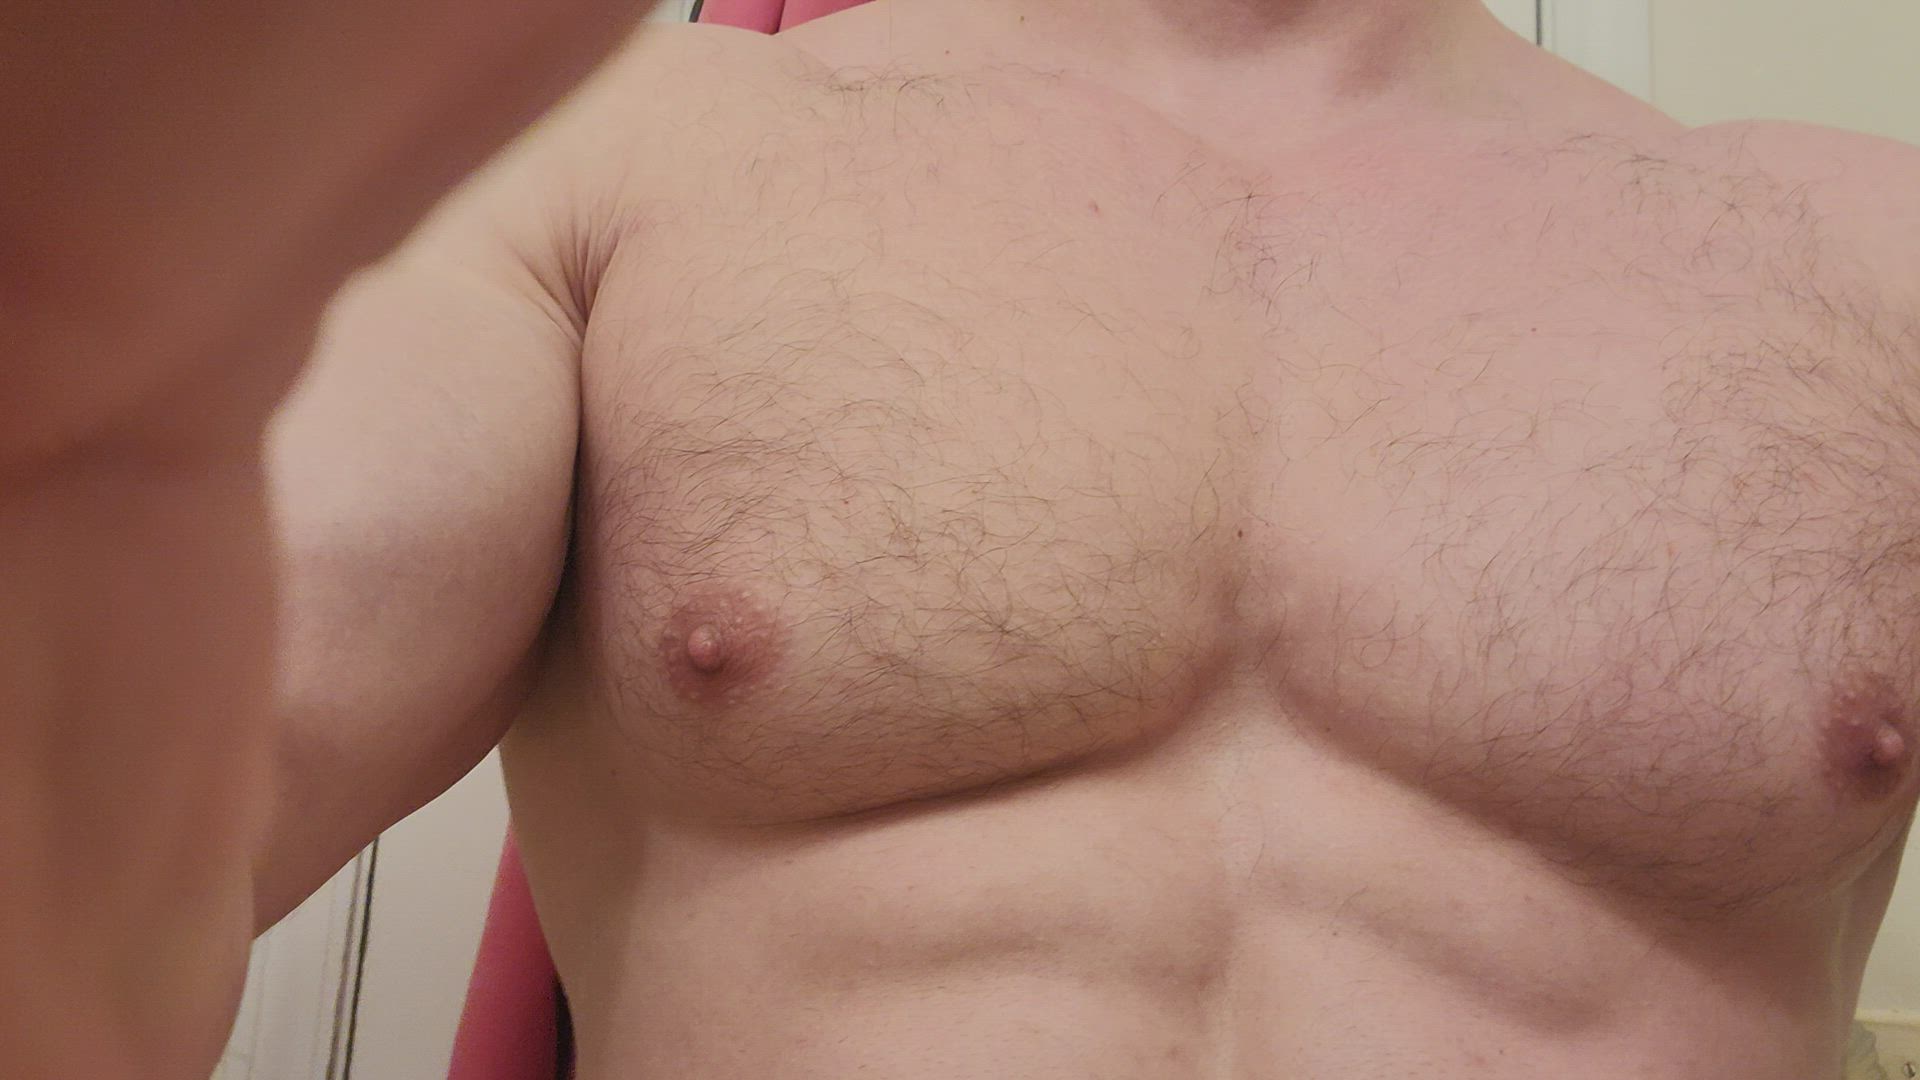 Abs porn video with onlyfans model Skyfire88 <strong>@skyfire88</strong>